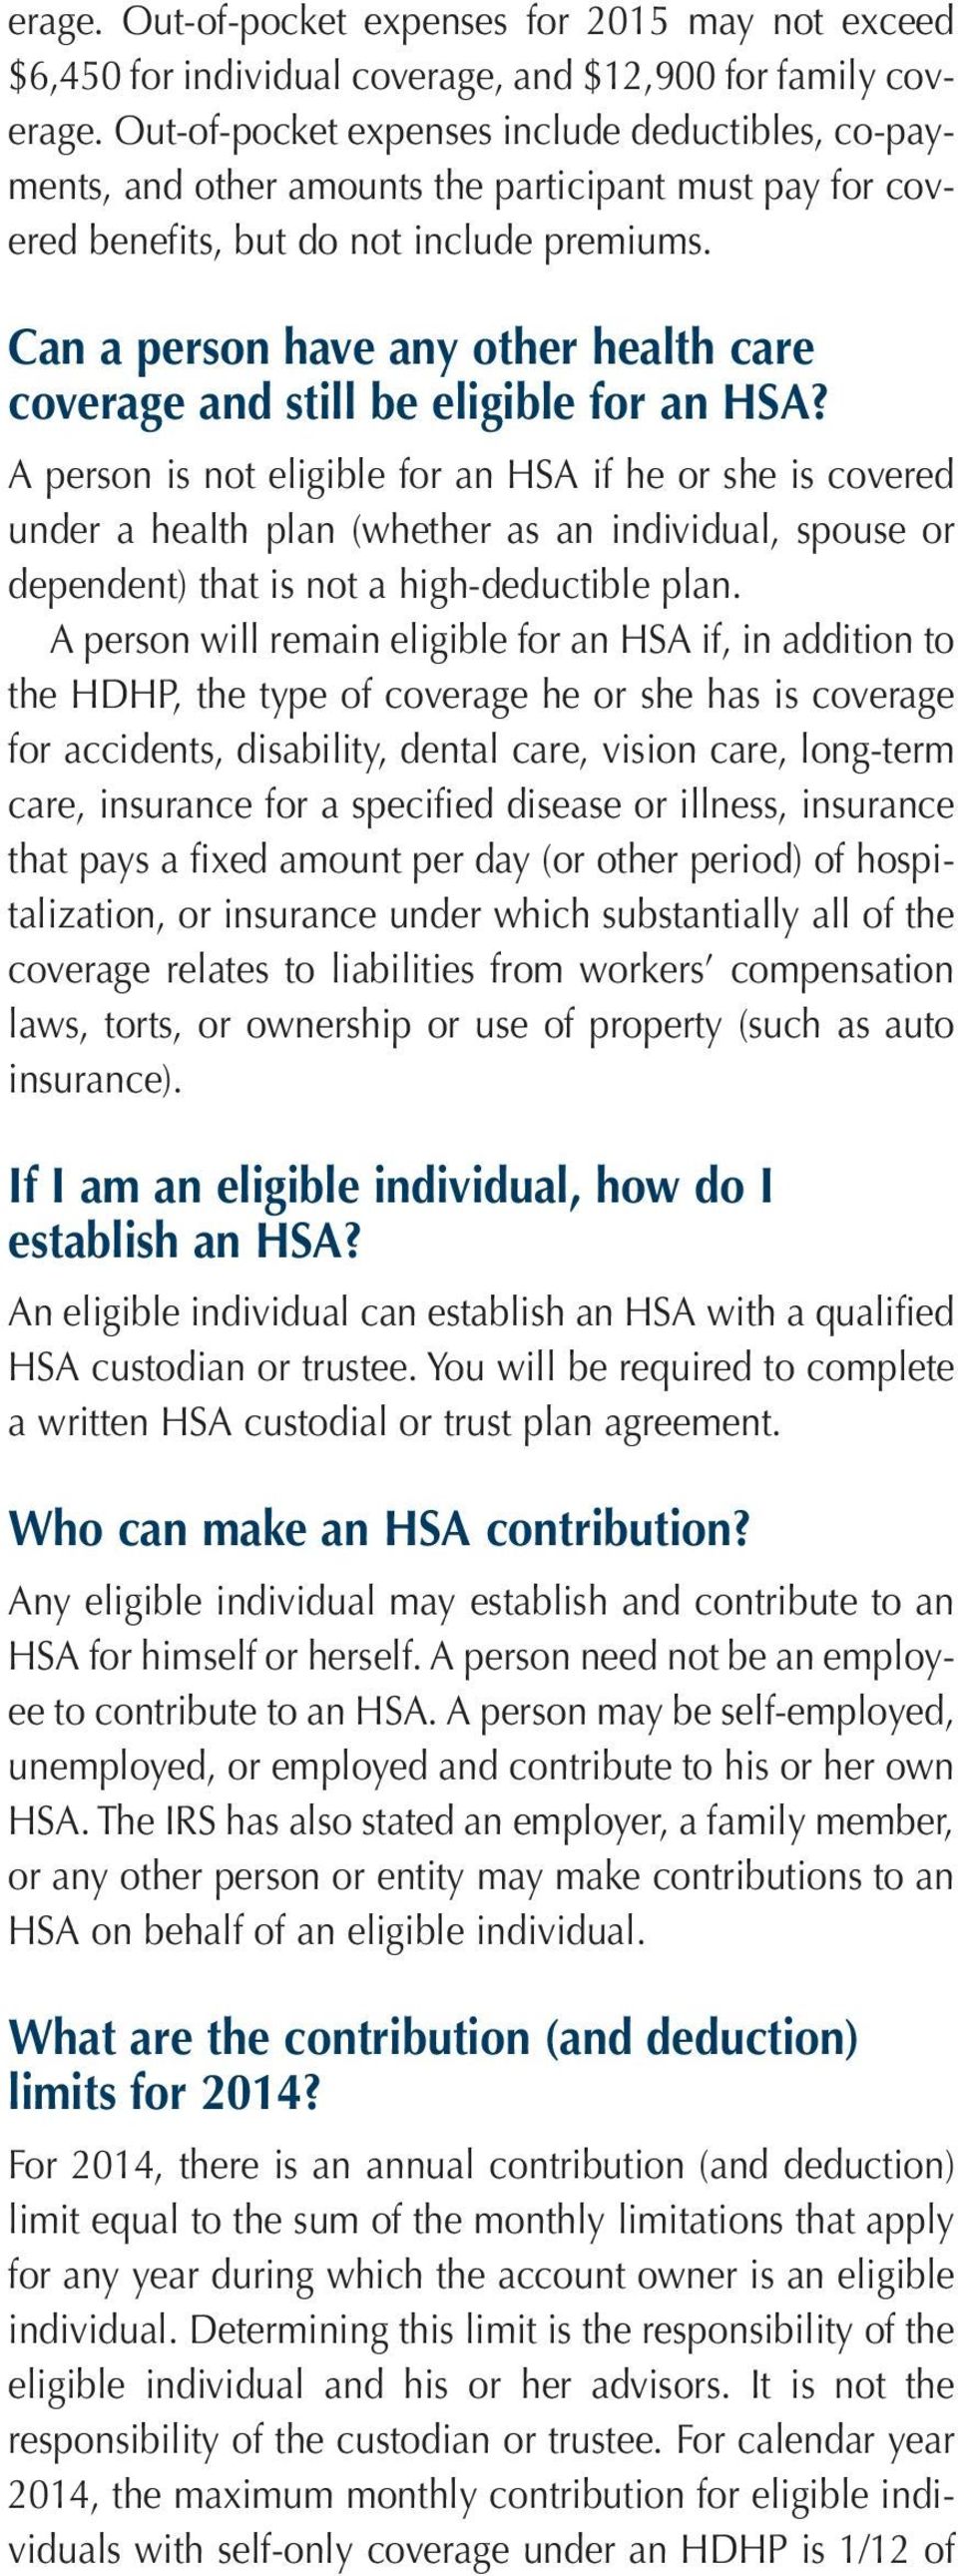 Can a person have any other health care coverage and still be eligible for an HSA?